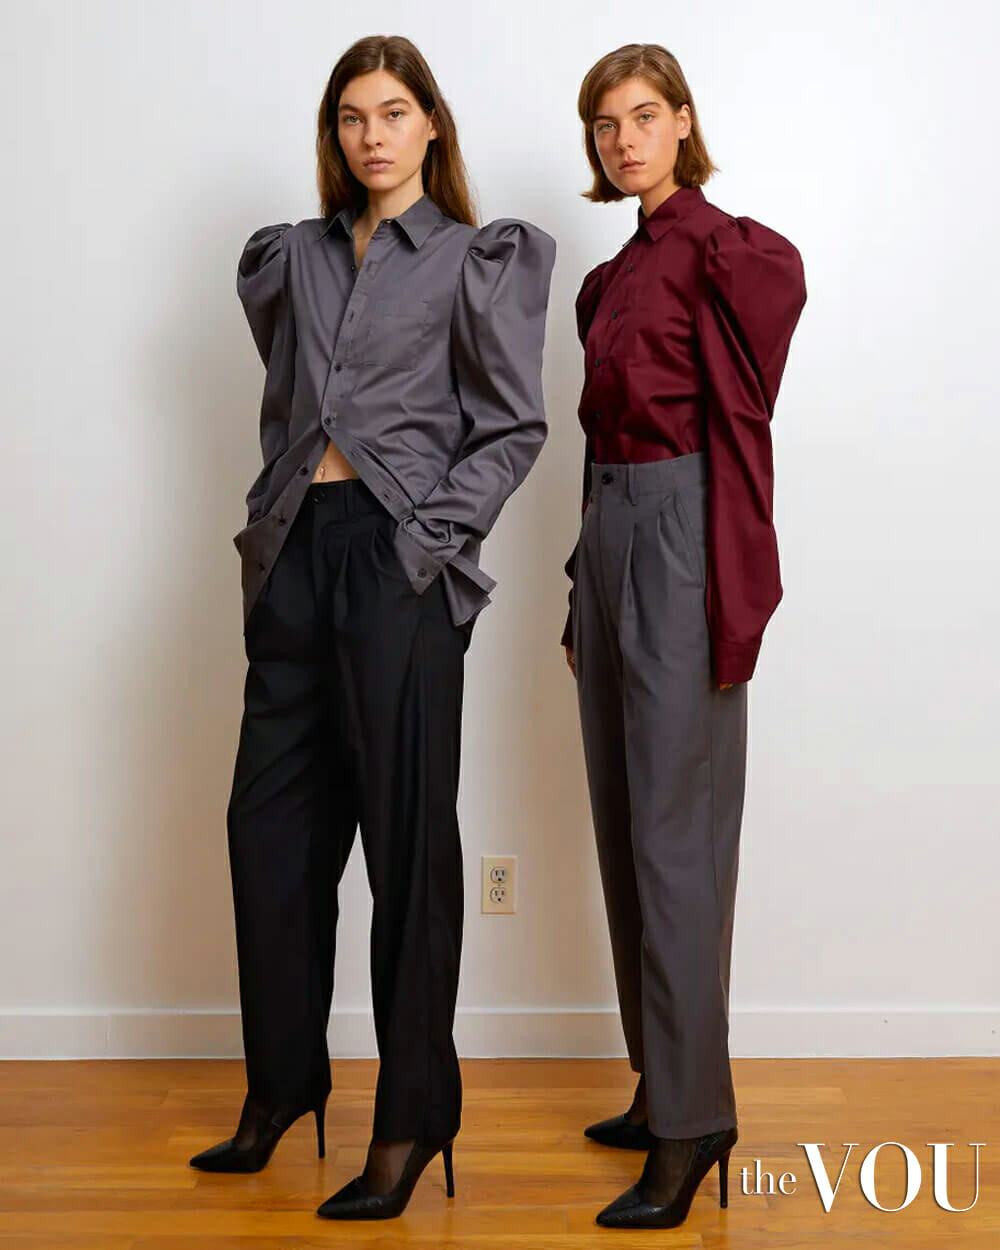 One DNA Androgynous Fashion